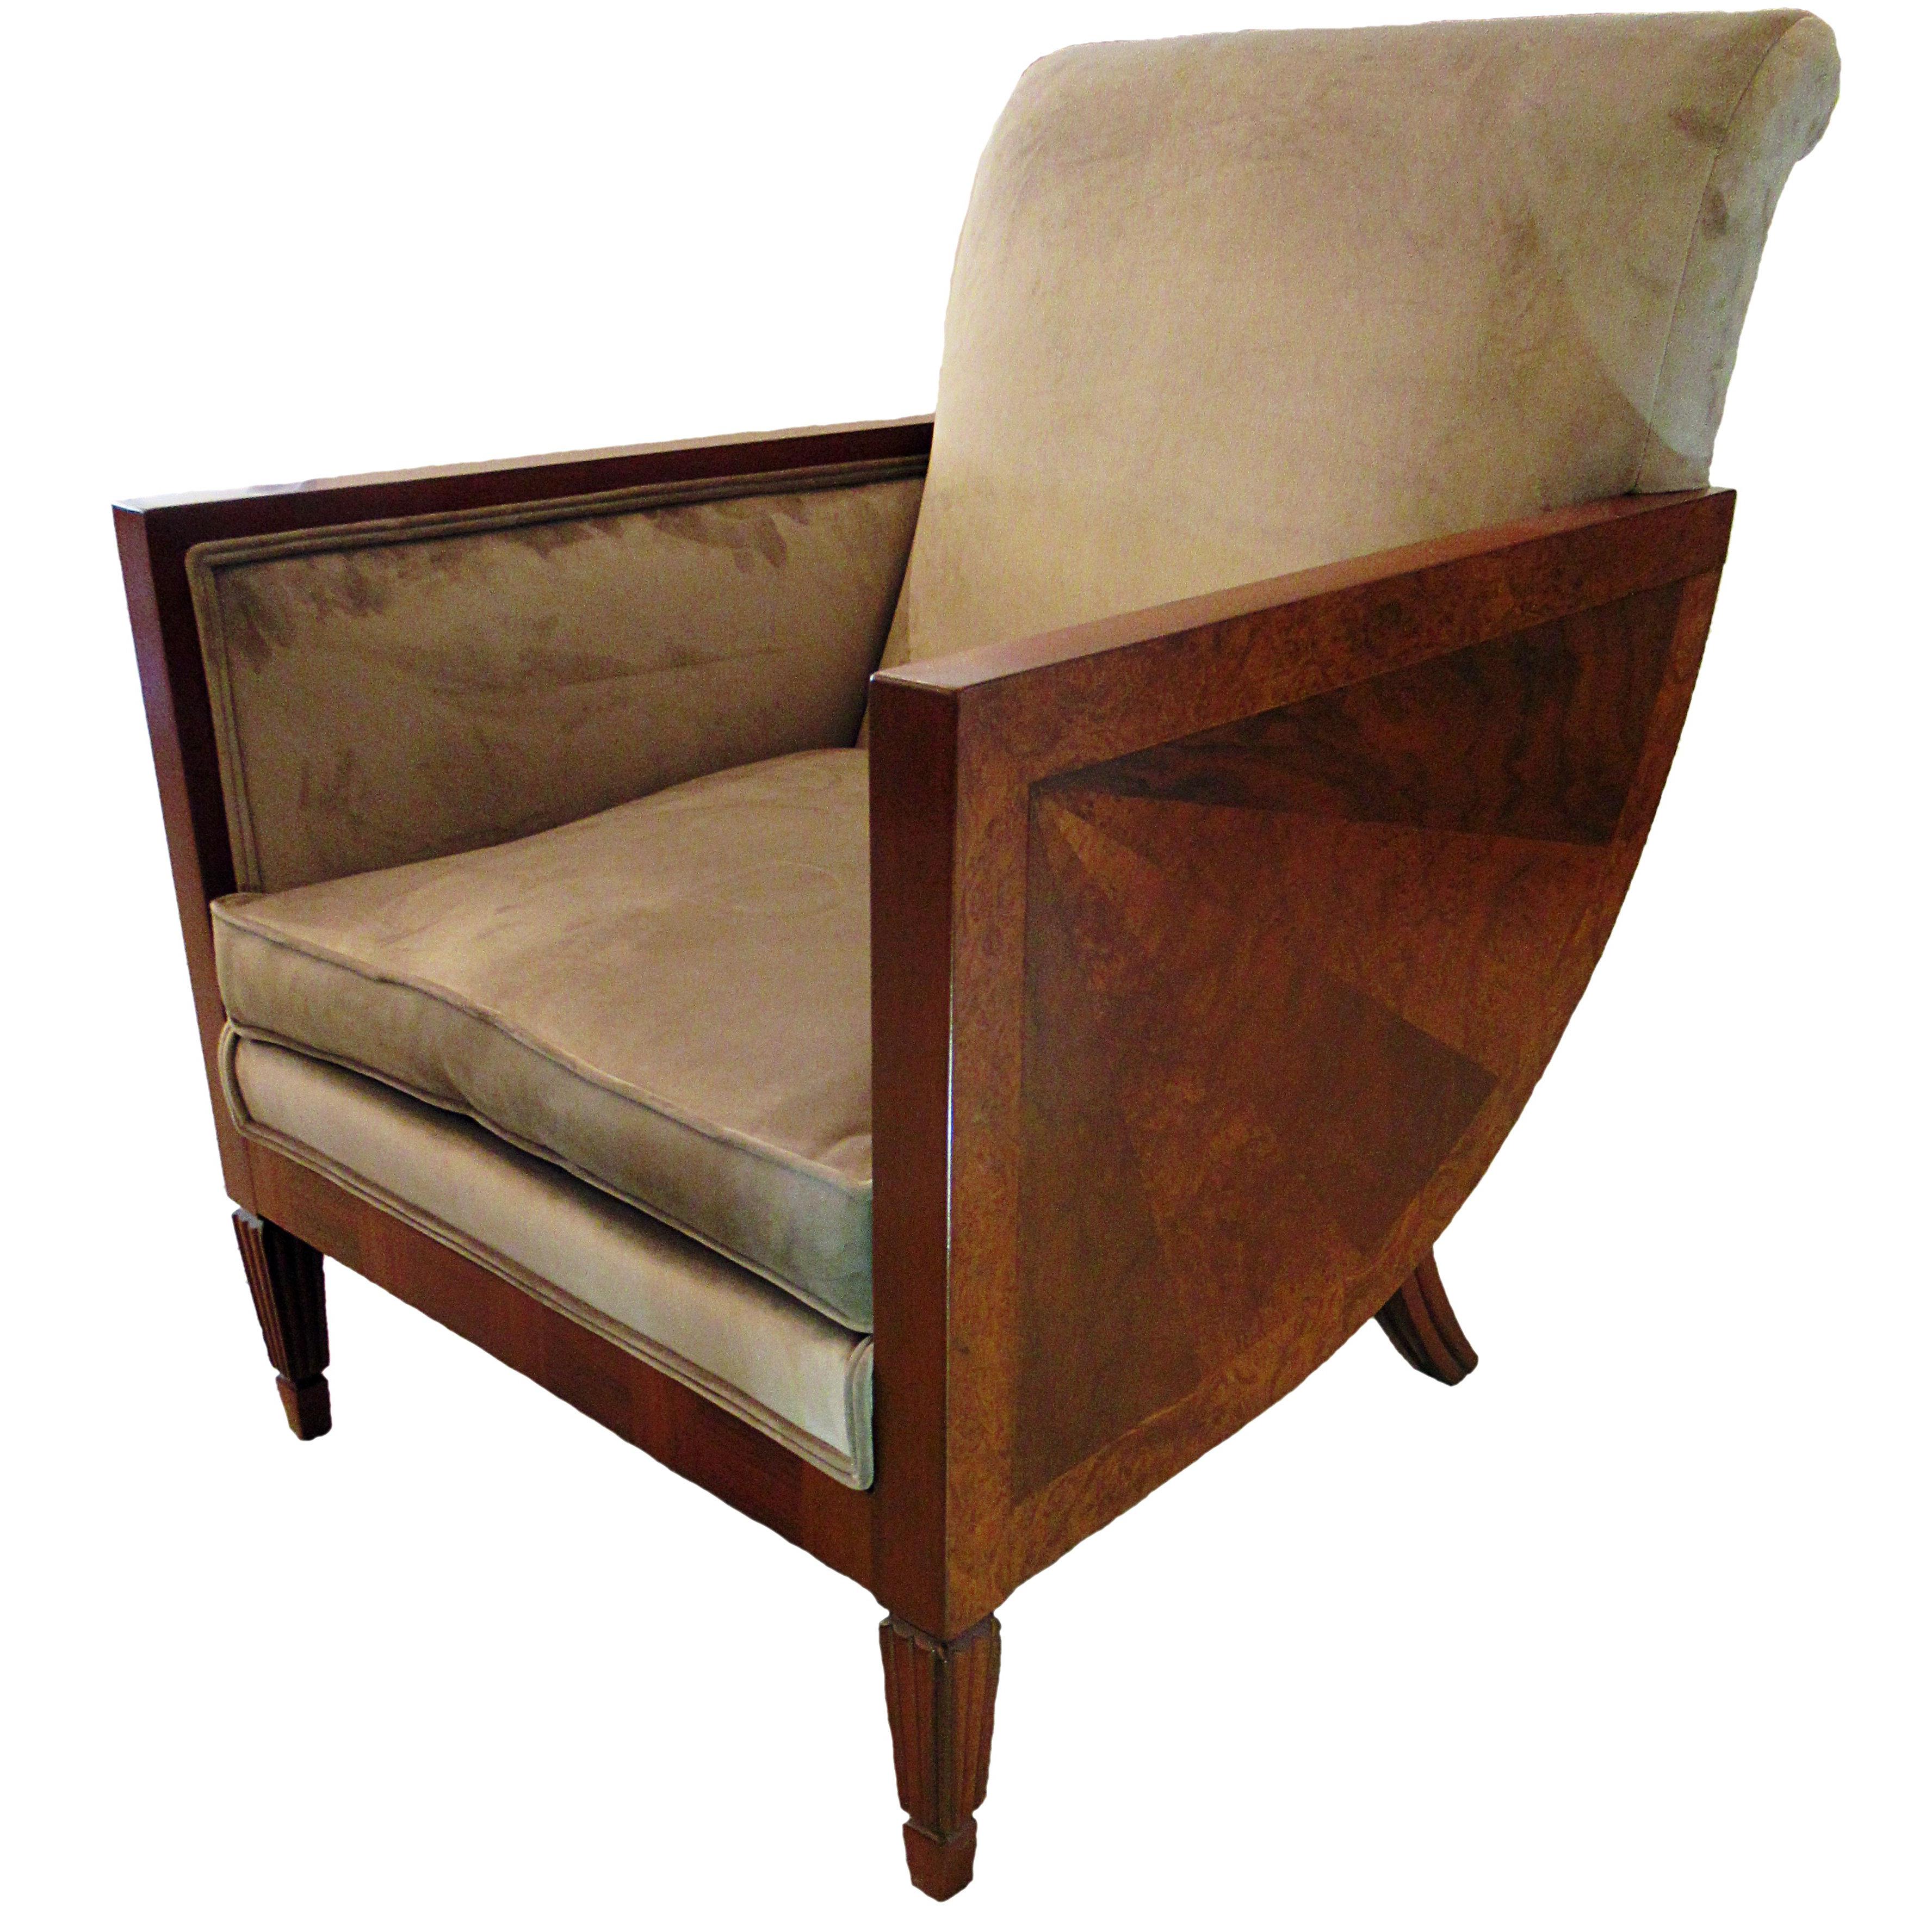 French Art Deco Mahogany, Walnut and Rosewood Bergère, Dominique